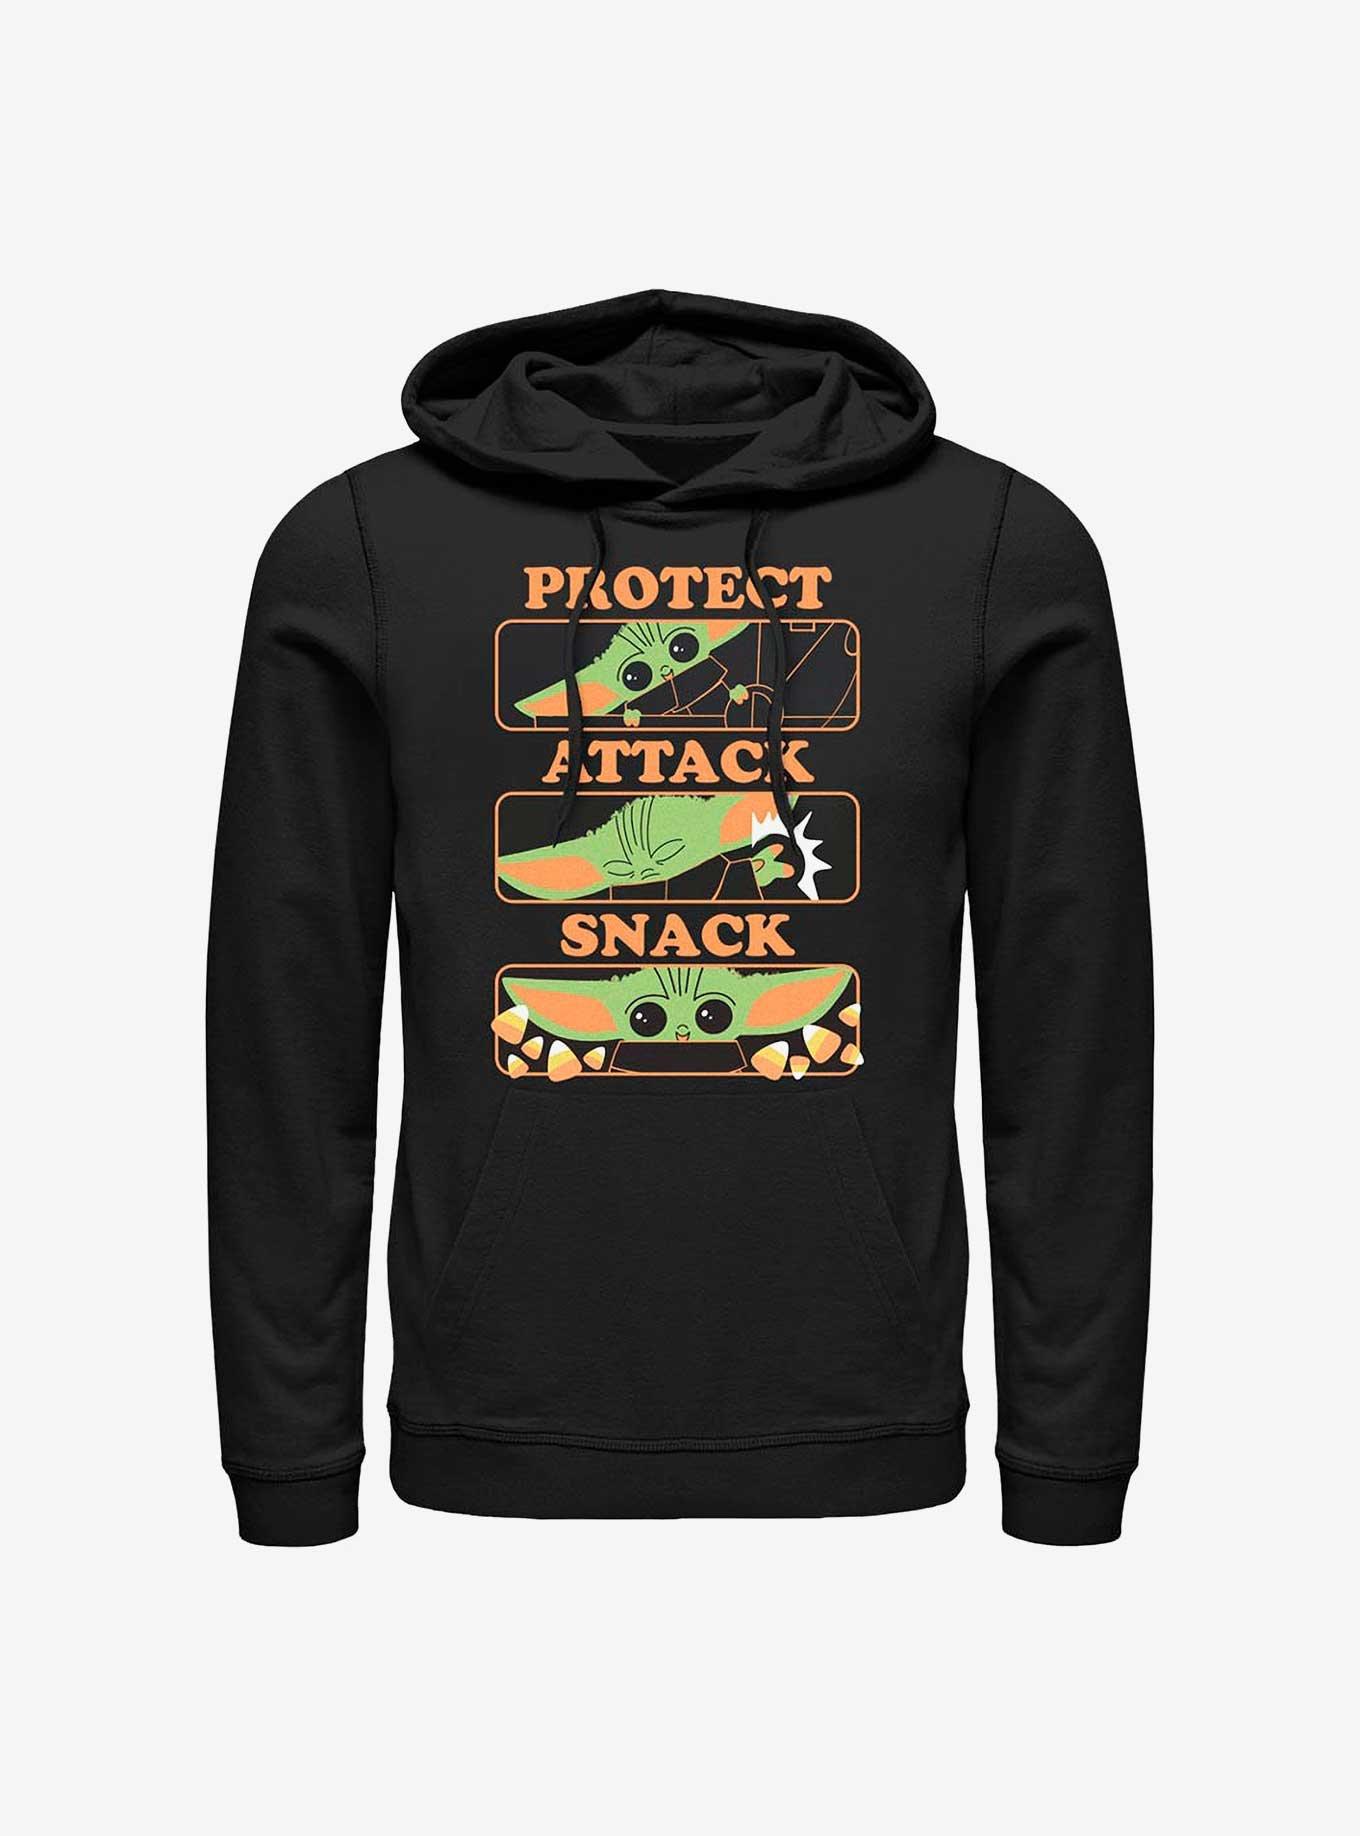 Star Wars The Mandalorian The Child Protect, Attack, & Snack Hoodie, BLACK, hi-res